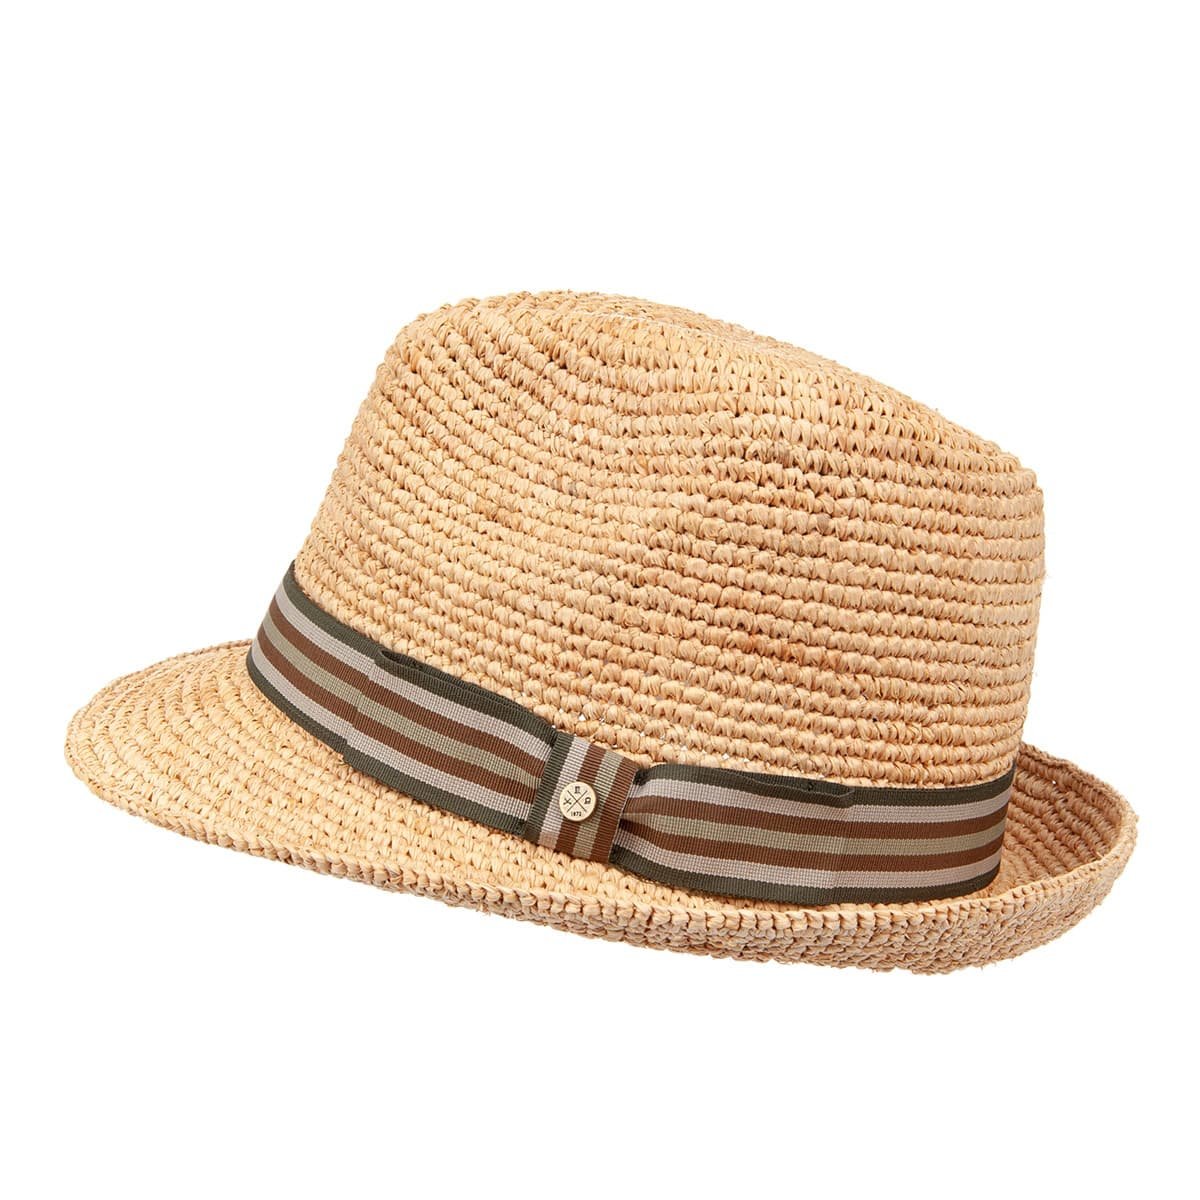 Straw cap by HUTTER